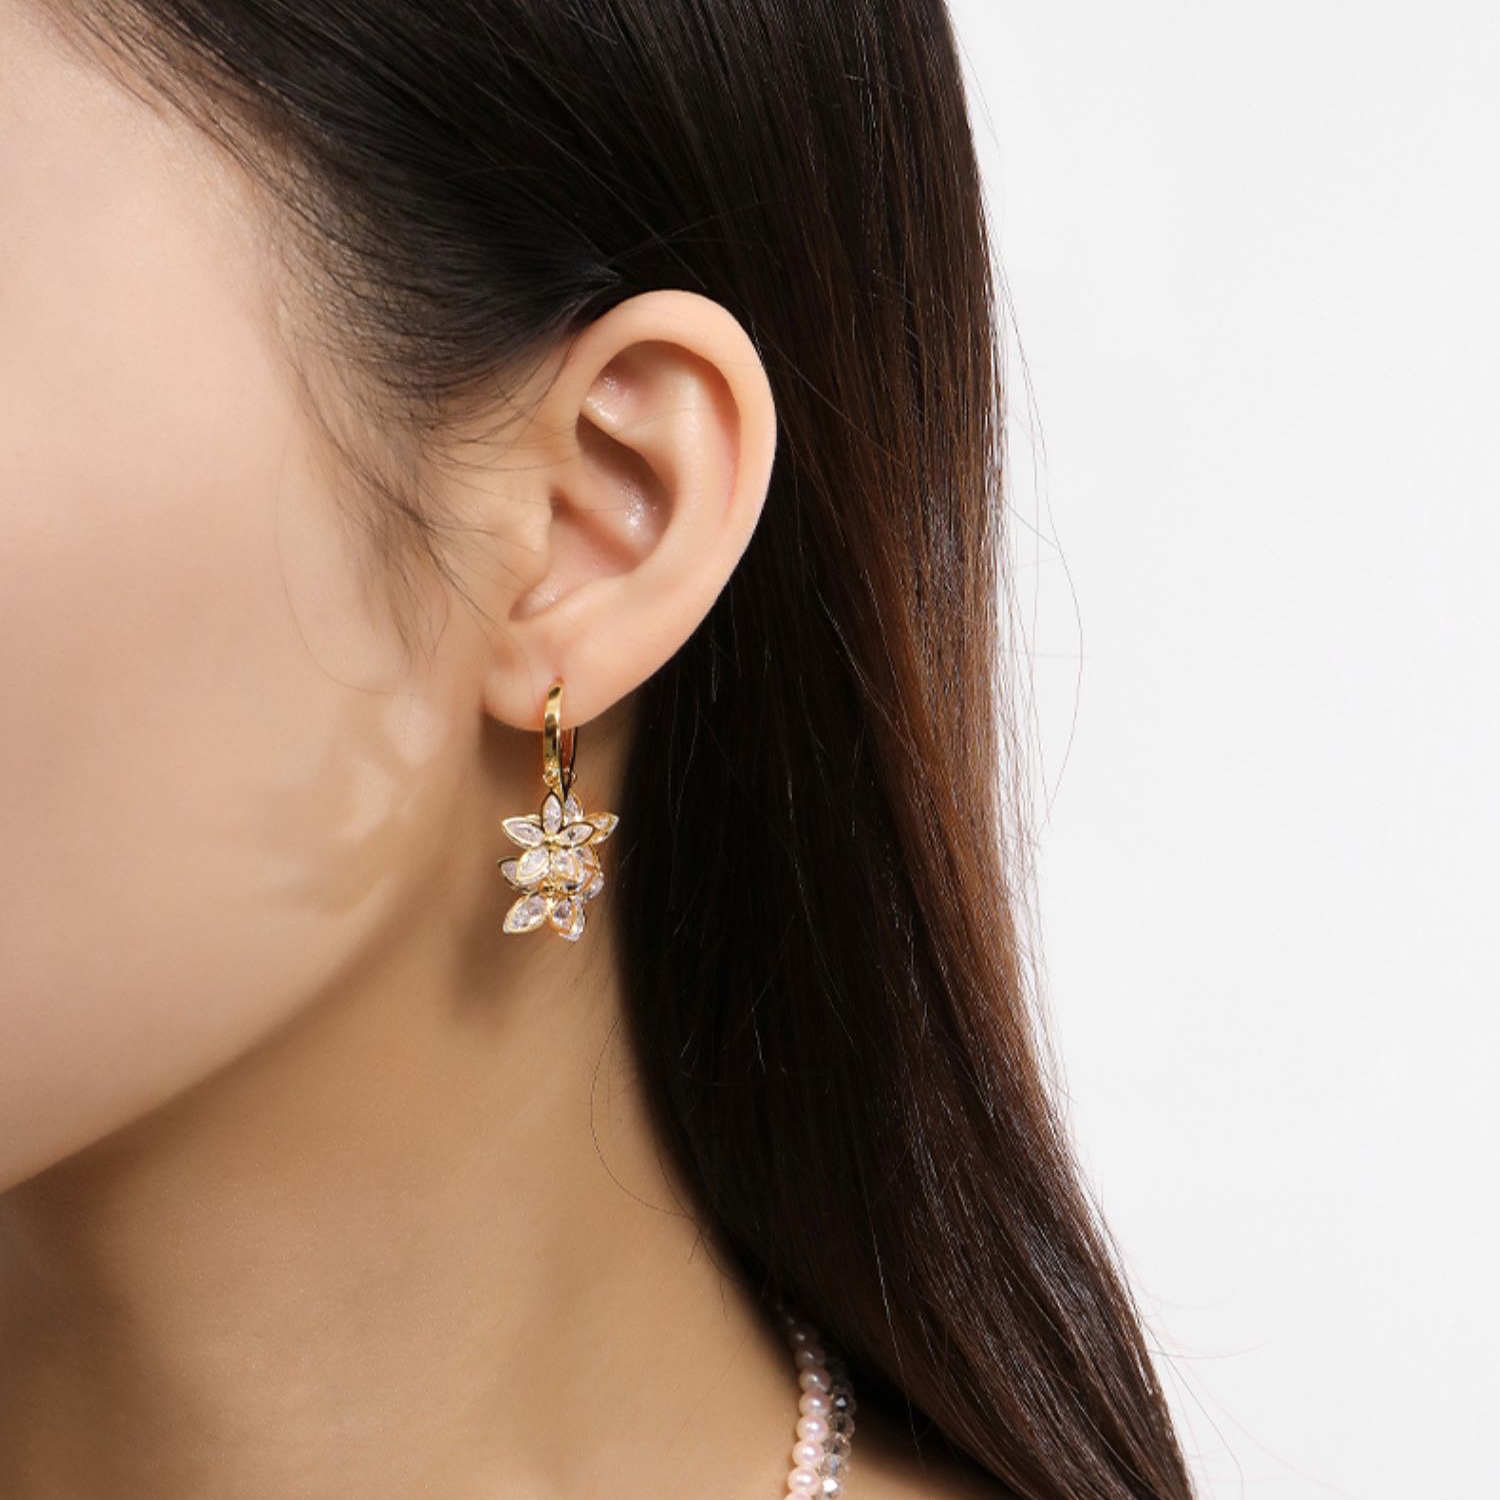 LAST DAY 70% OFF - Creative Small Flower Earrings (Buy 2 Free Shipping)